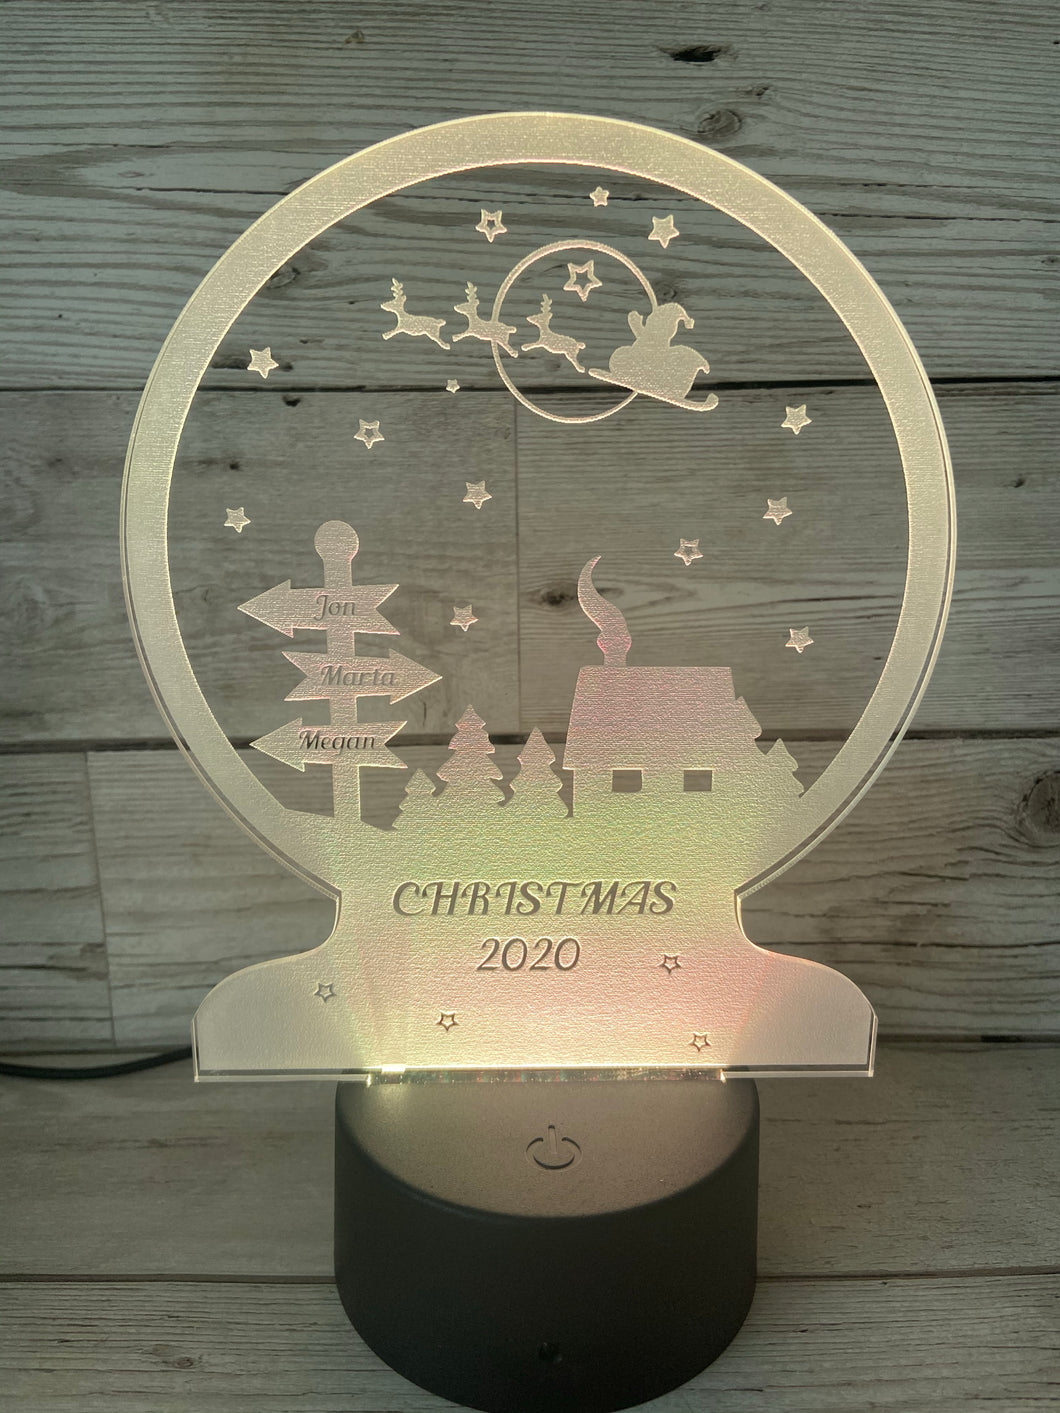 Stunning Christmas snow globe LED light display-9 colours and remote controller - Laser LLama Designs Ltd